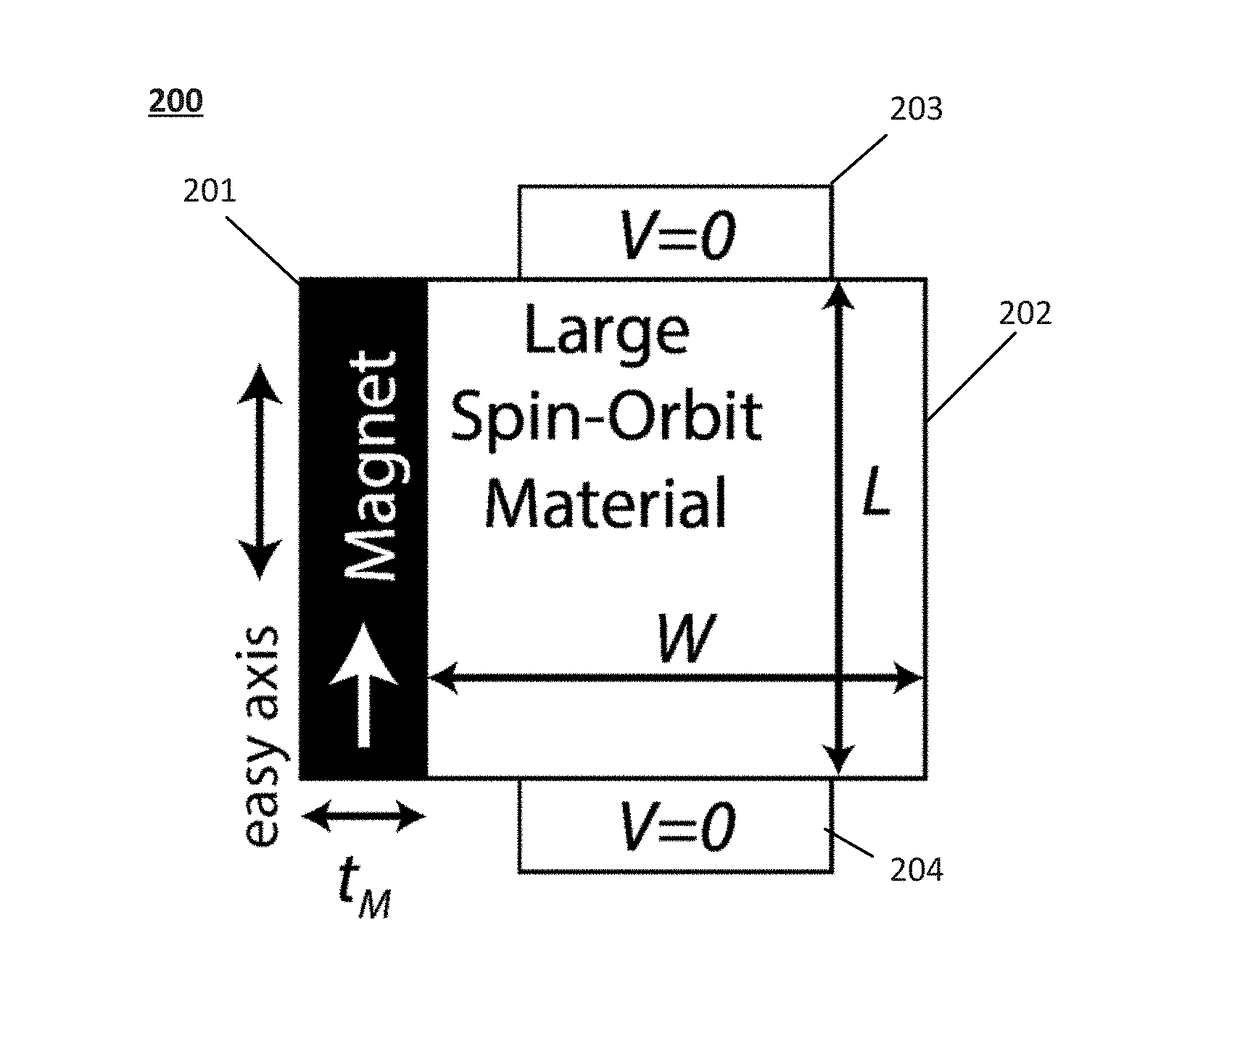 Voltage-controlled magnetic-based devices having topological insulator/magnetic insulator heterostructure